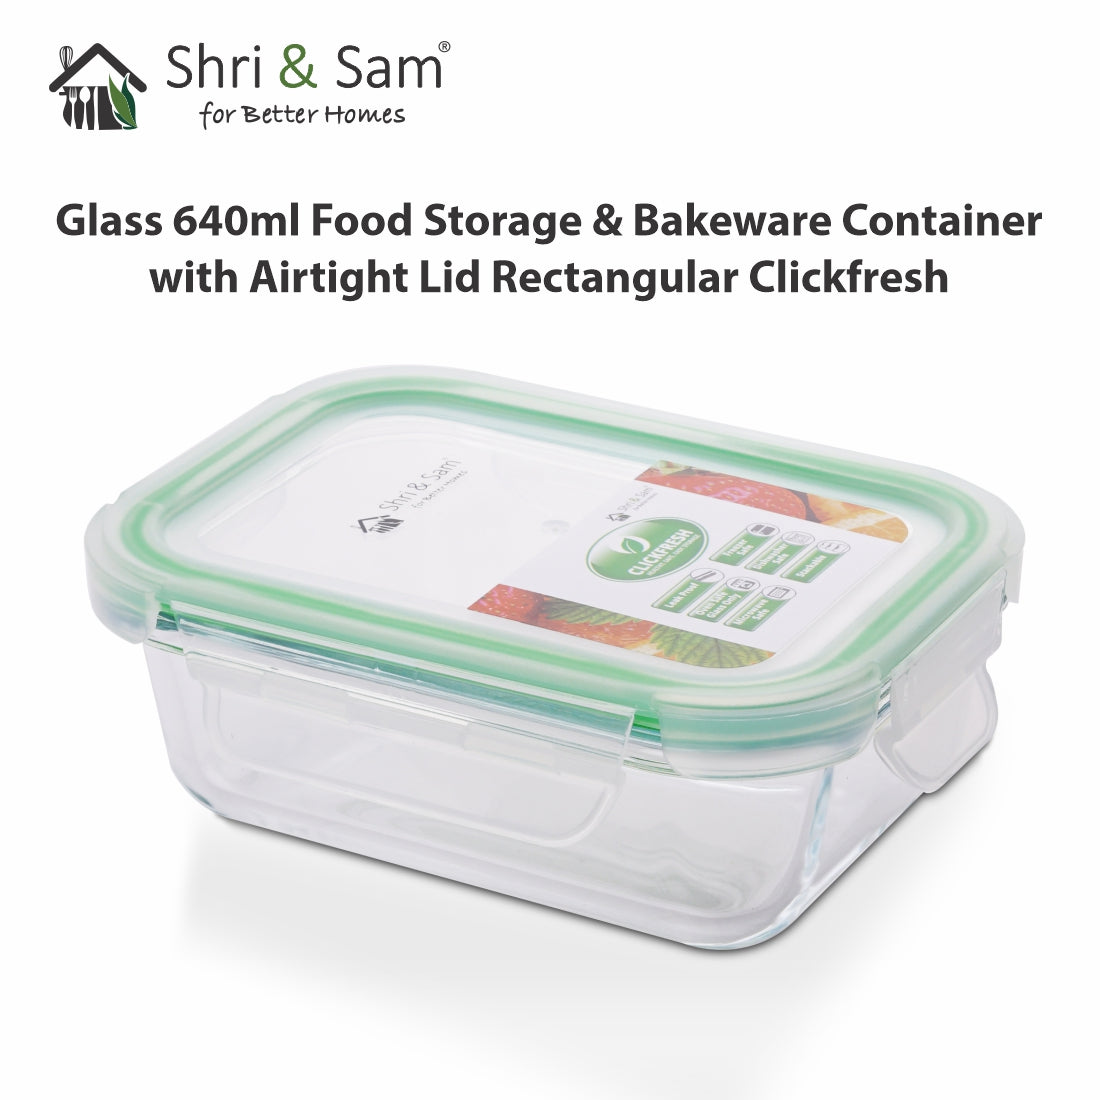 Glass 640ml Food Storage & Bakeware Container with Airtight Lid Rectangular Clickfresh